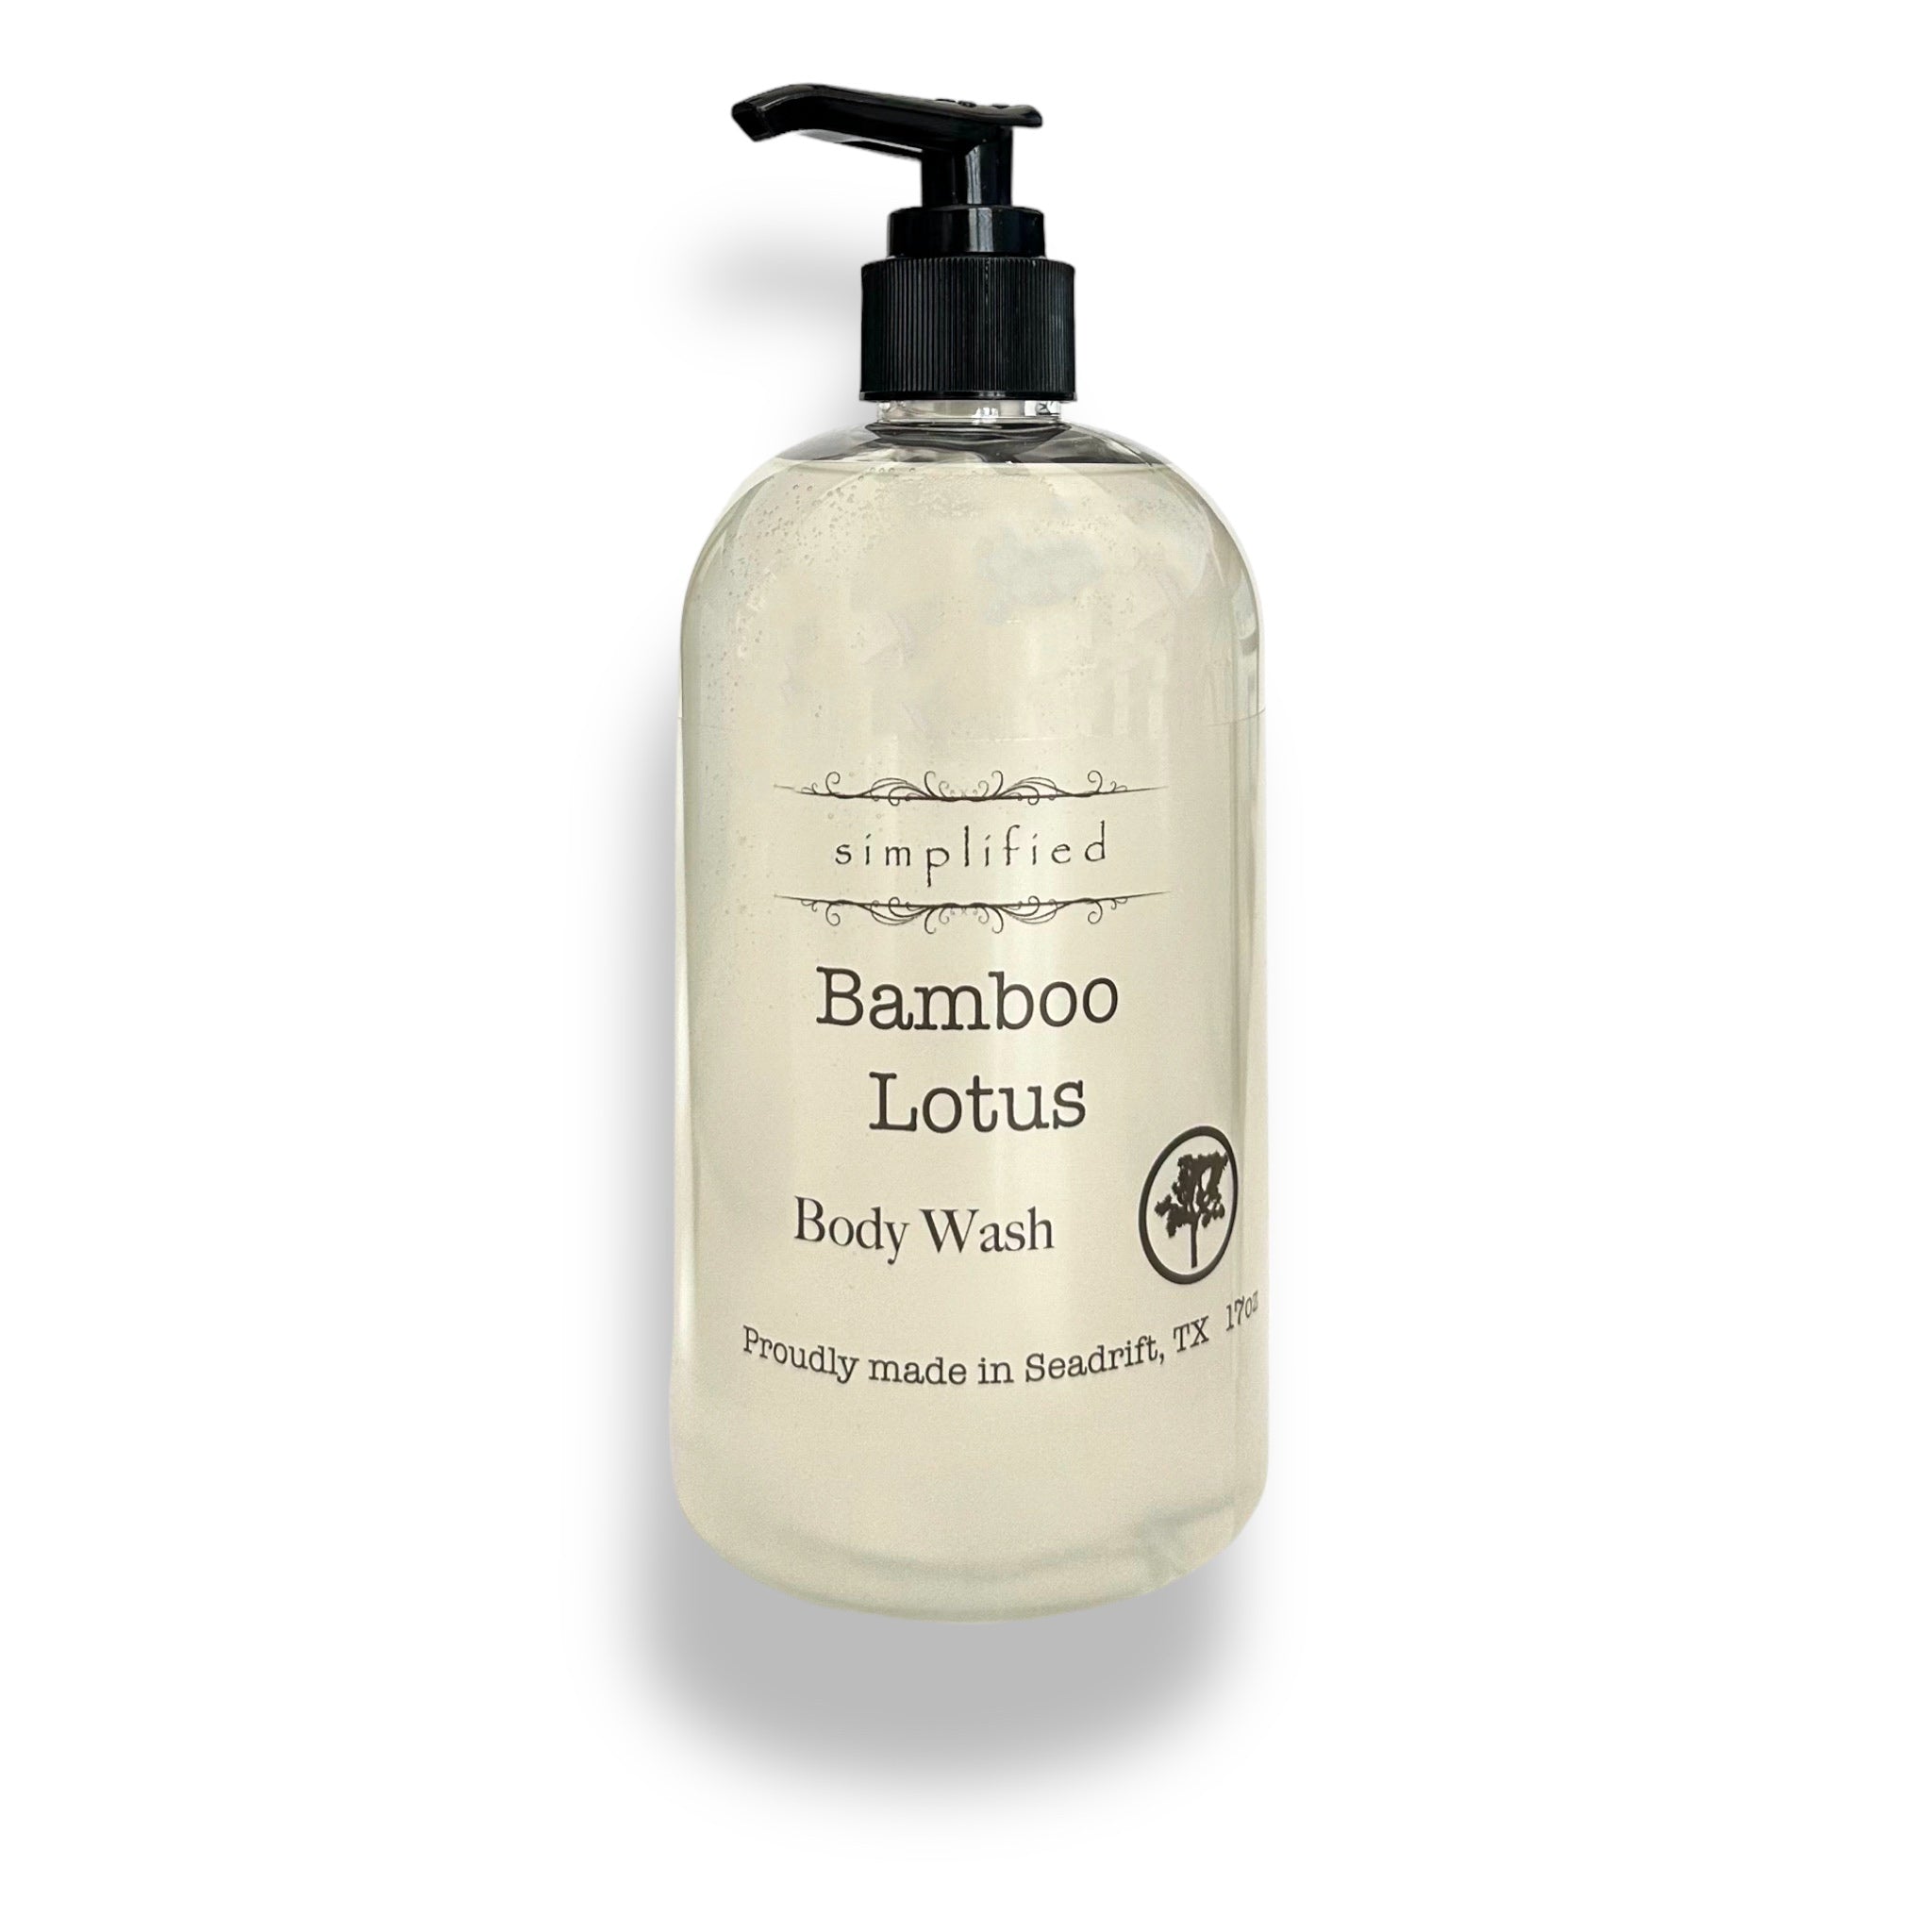 SIMPLIFIED SOAP Body Wash - Pick Your Scent